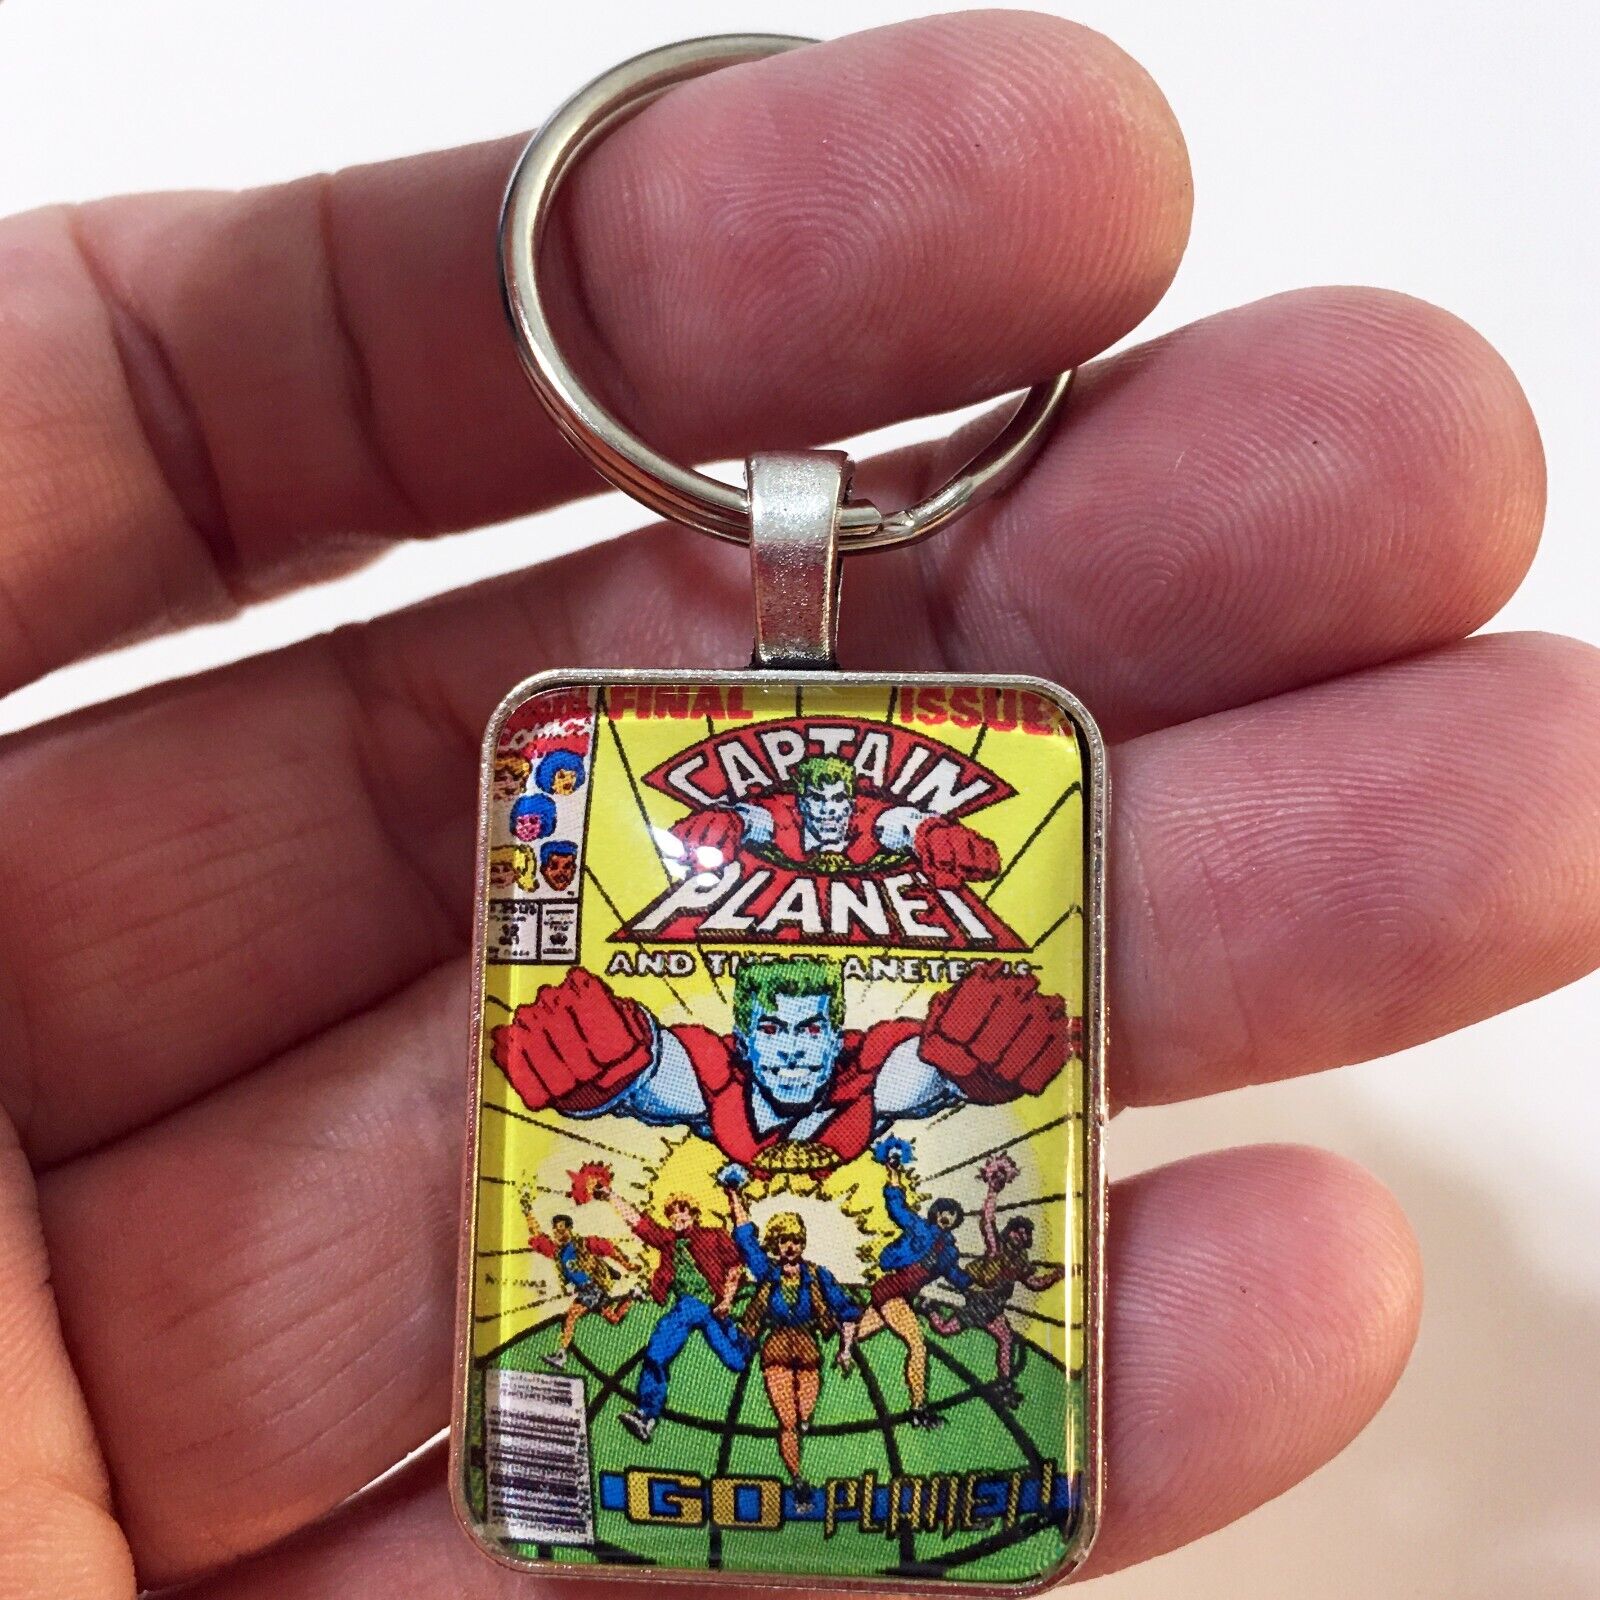 Captain Planet and The Planeteers #12 Cover Key Ring or Necklace Cartoon Comic